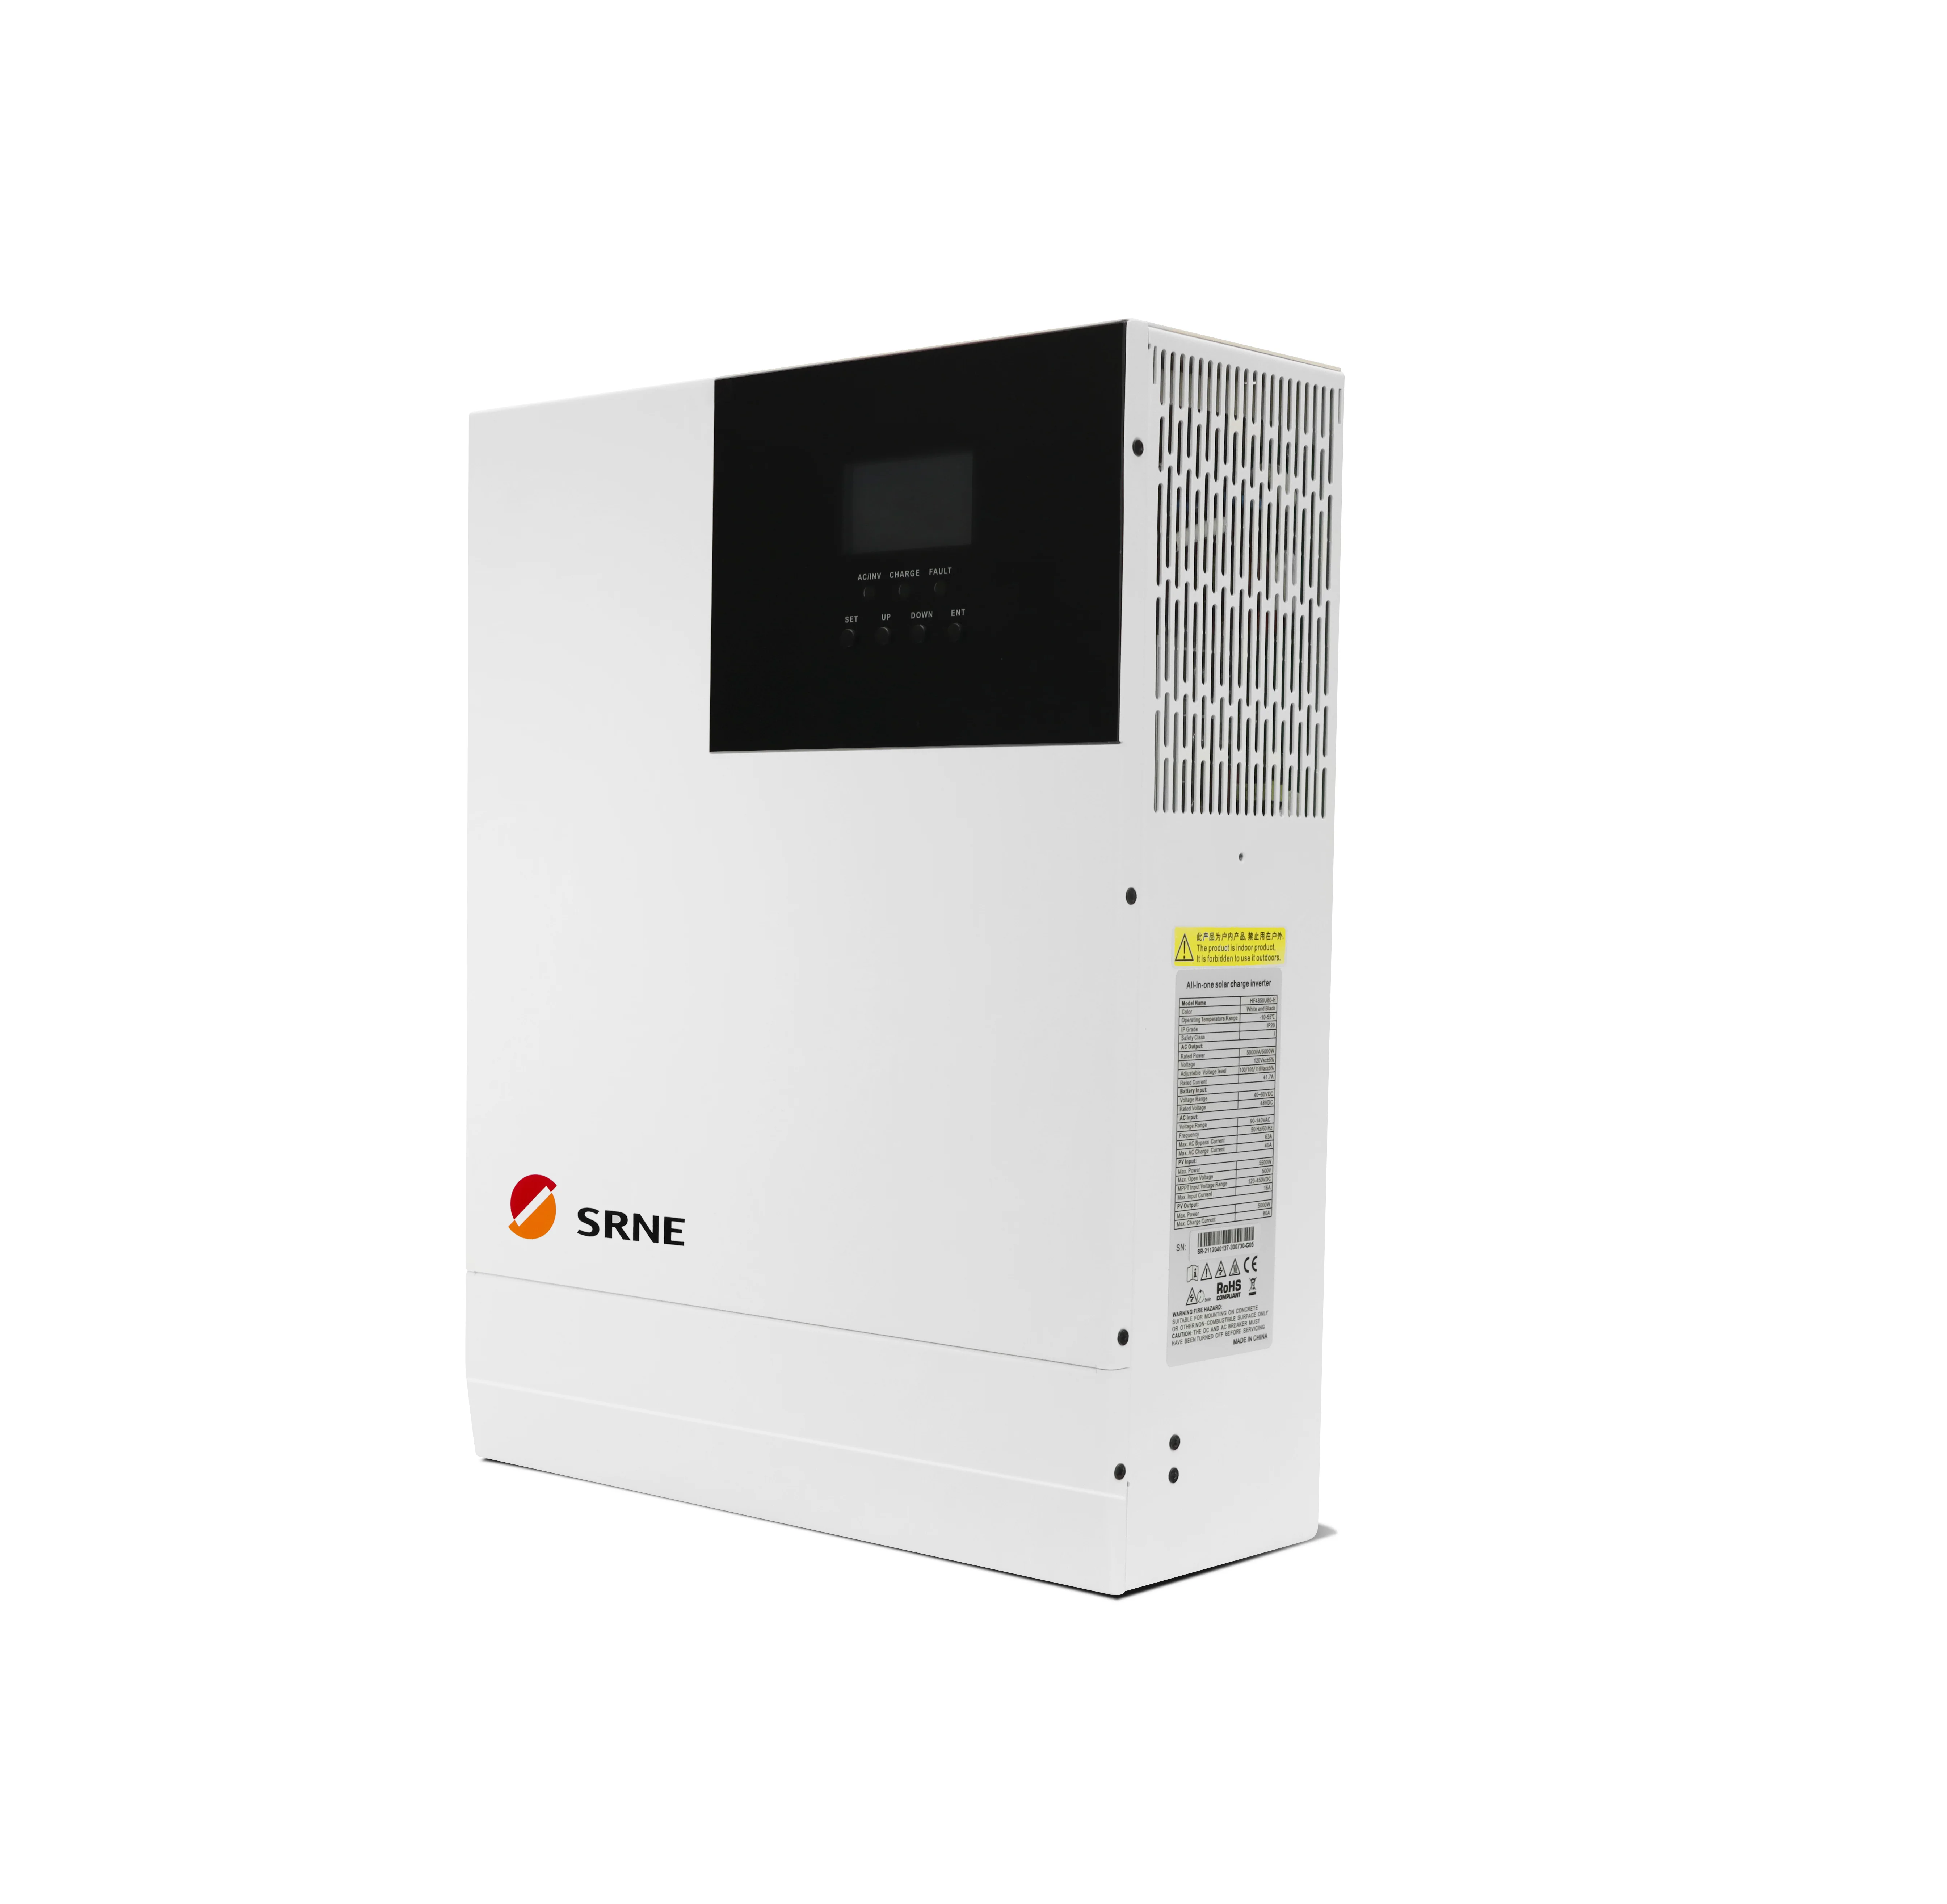 SRNE 5000W 48V Hybrid Inversor, Indoor use only; all-in-one solar charger inverter with cautionary warnings about overheating, shock, and fires.